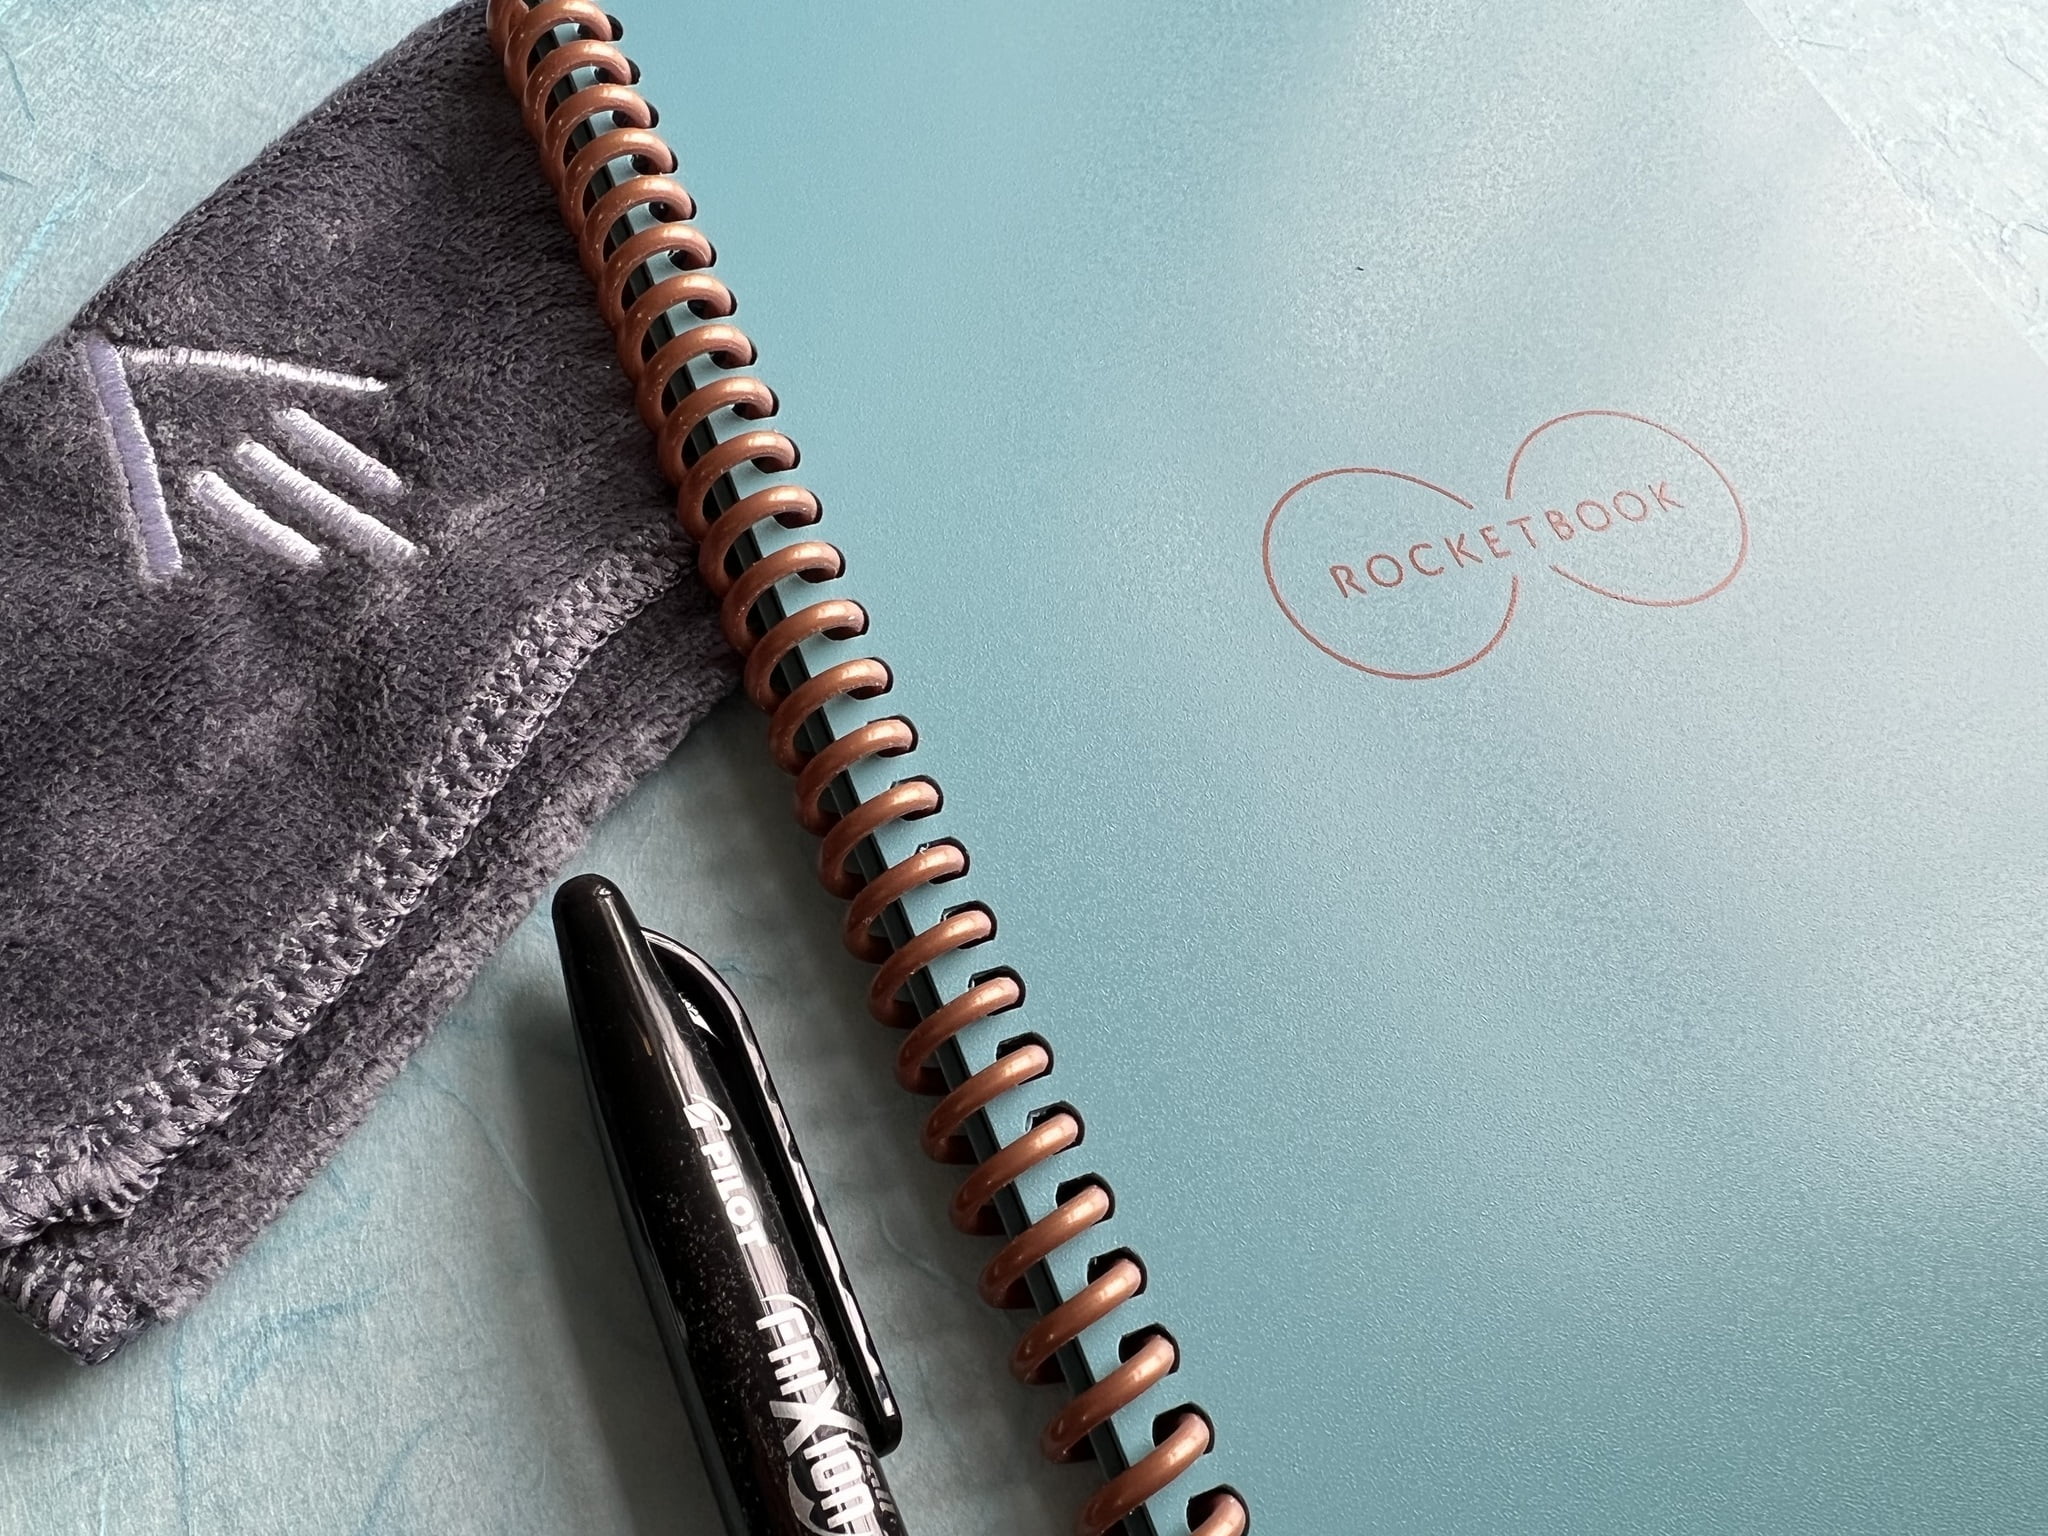 Rocketbook Core Reusable Smart Notebook | Innovative, Eco-Friendly, Digitally Connected Notebook With Cloud Sharing Capabilities | Dotted, 6 X 8.8, 36 Pg, Midnight Blue, With Pen, Cloth, And App Included